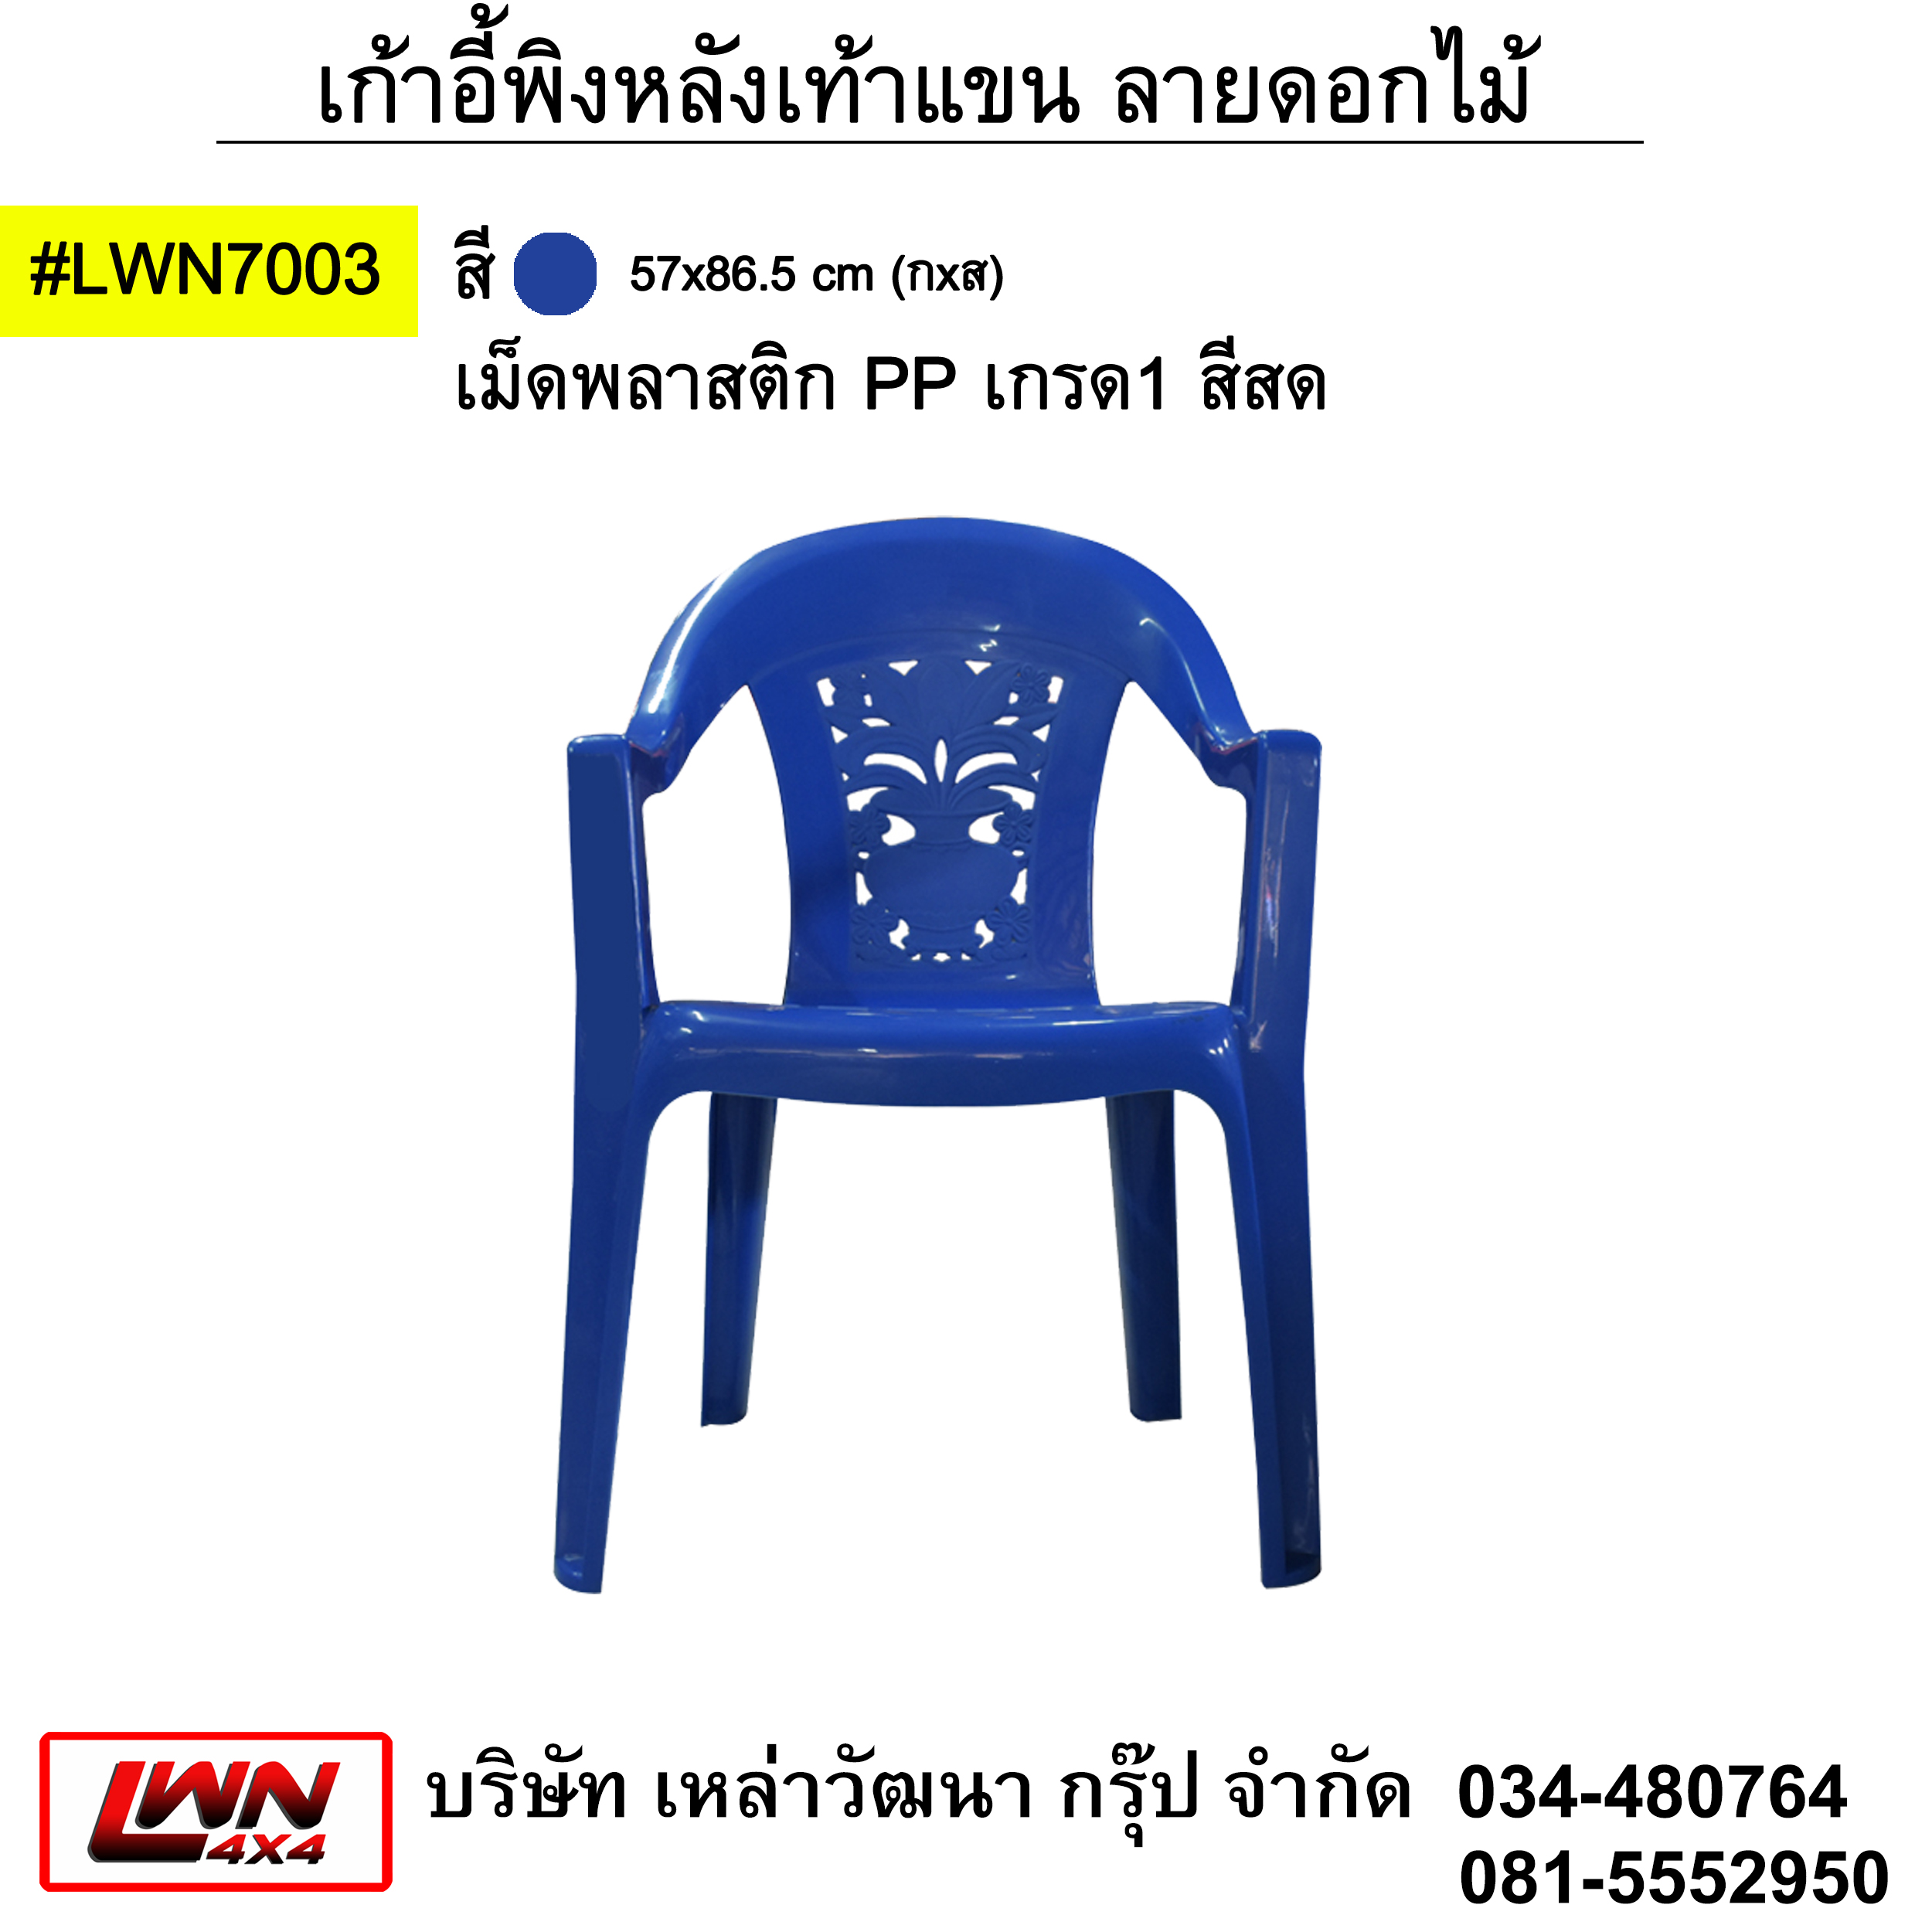 Plastic Chair with armrests #LWN7003